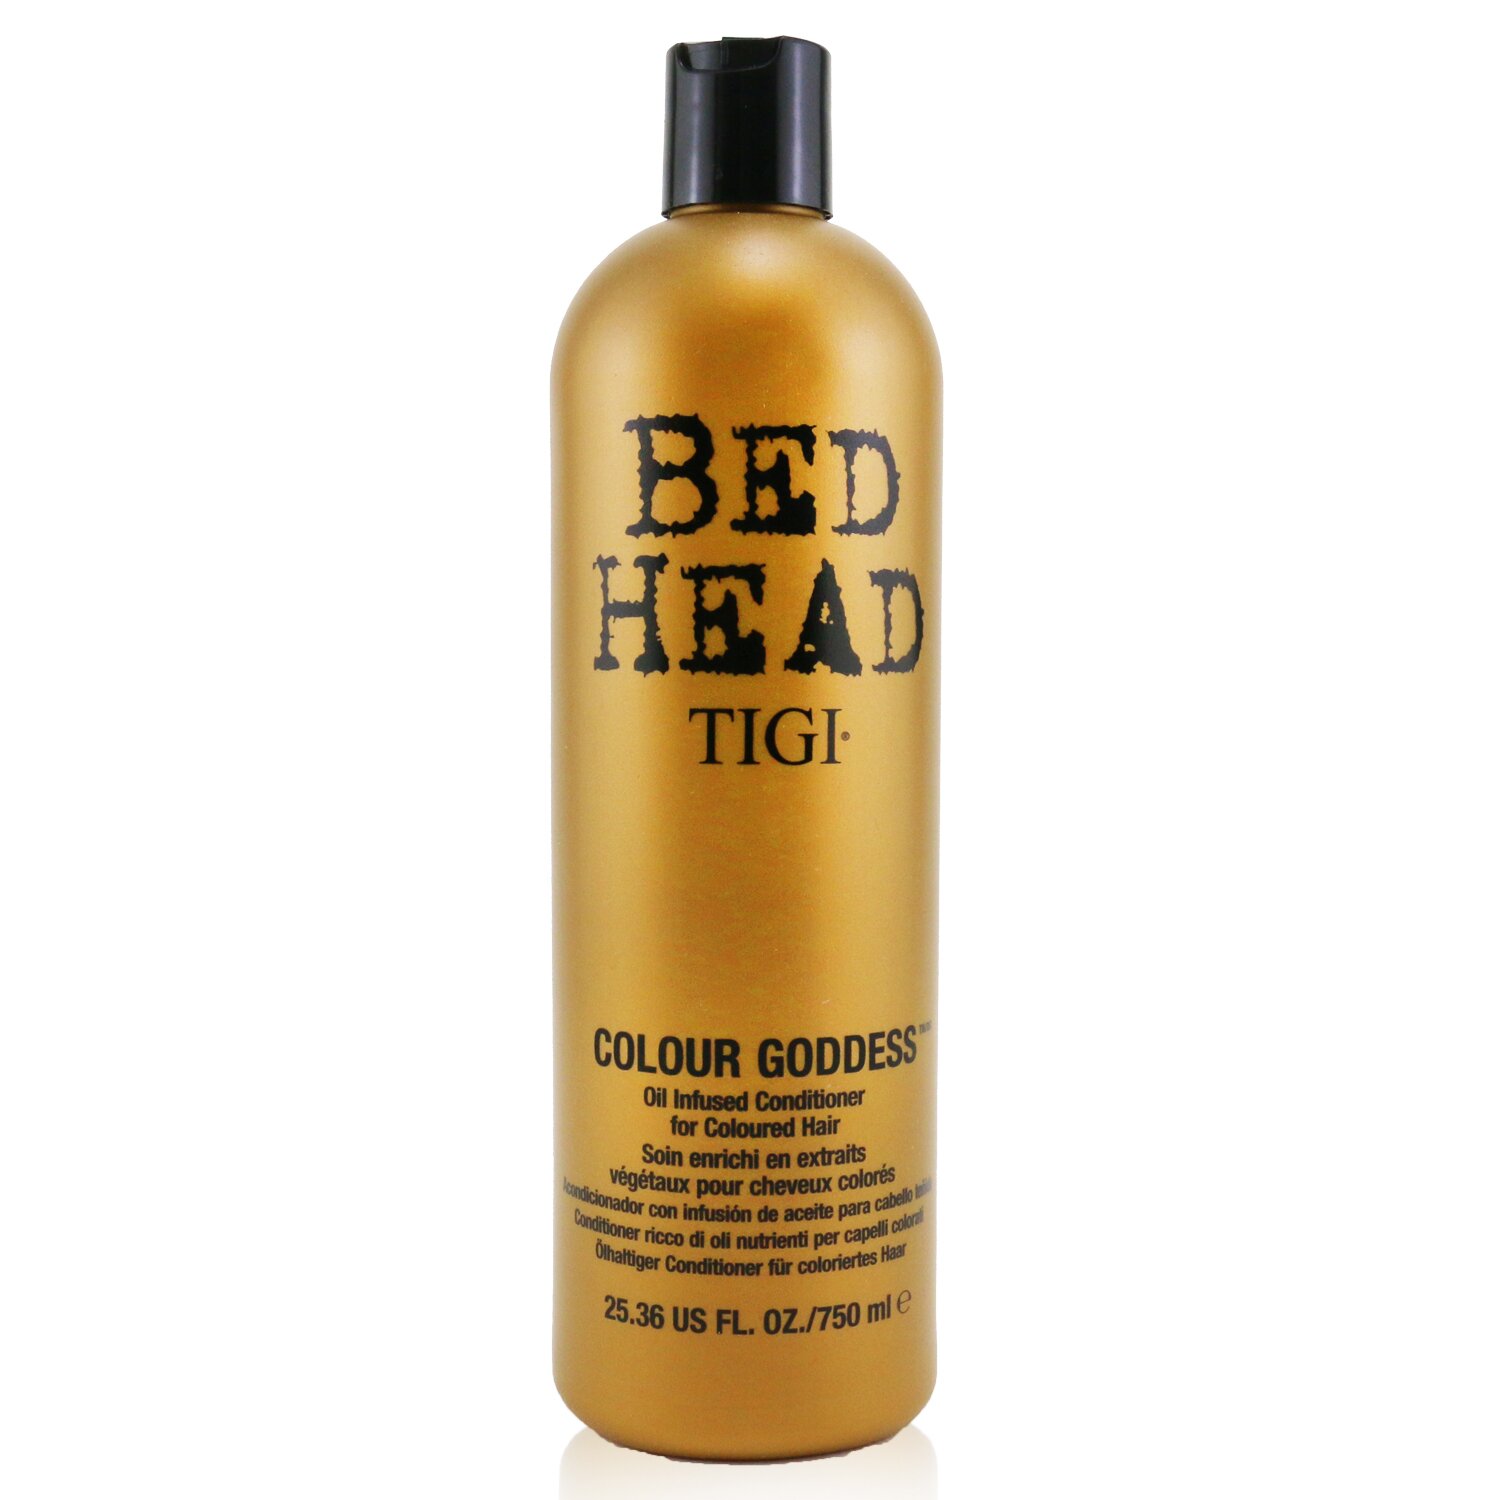 Photos - Hair Product TIGI Bed Head Colour Goddess Oil Infused Conditioner 